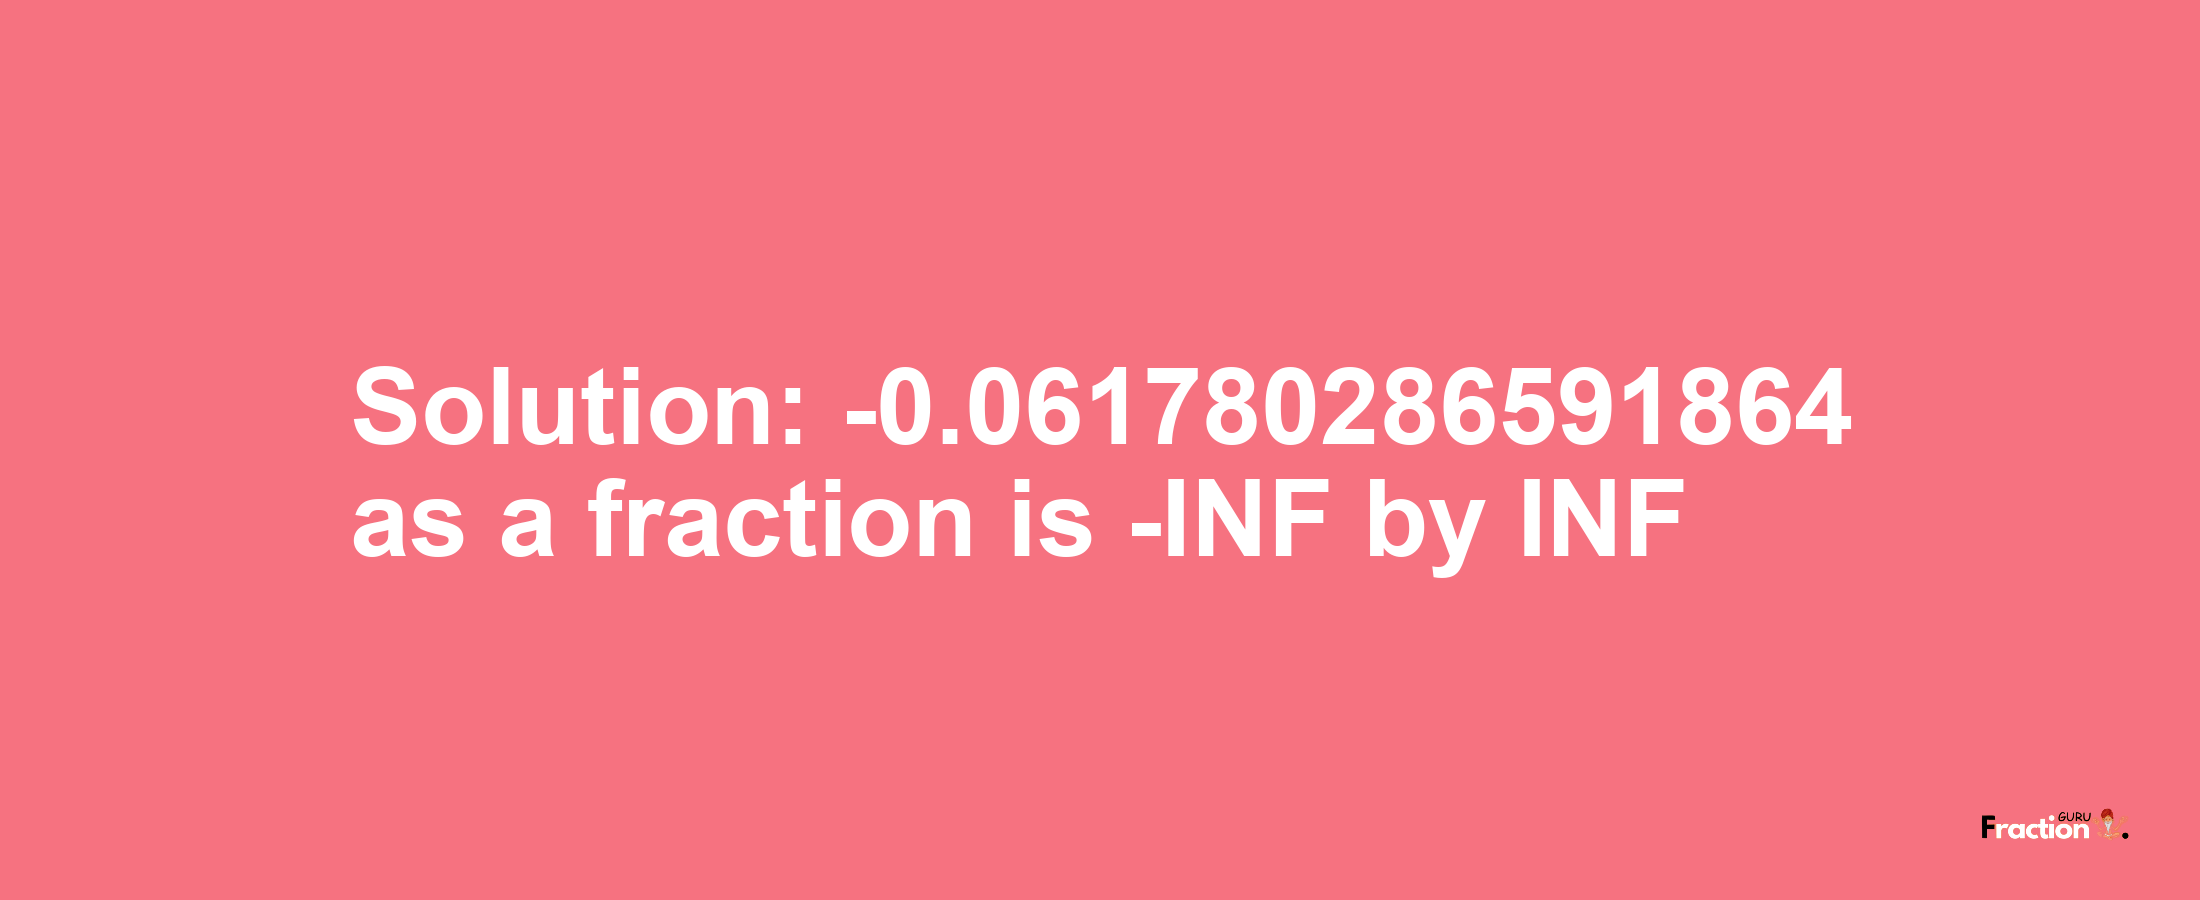 Solution:-0.061780286591864 as a fraction is -INF/INF